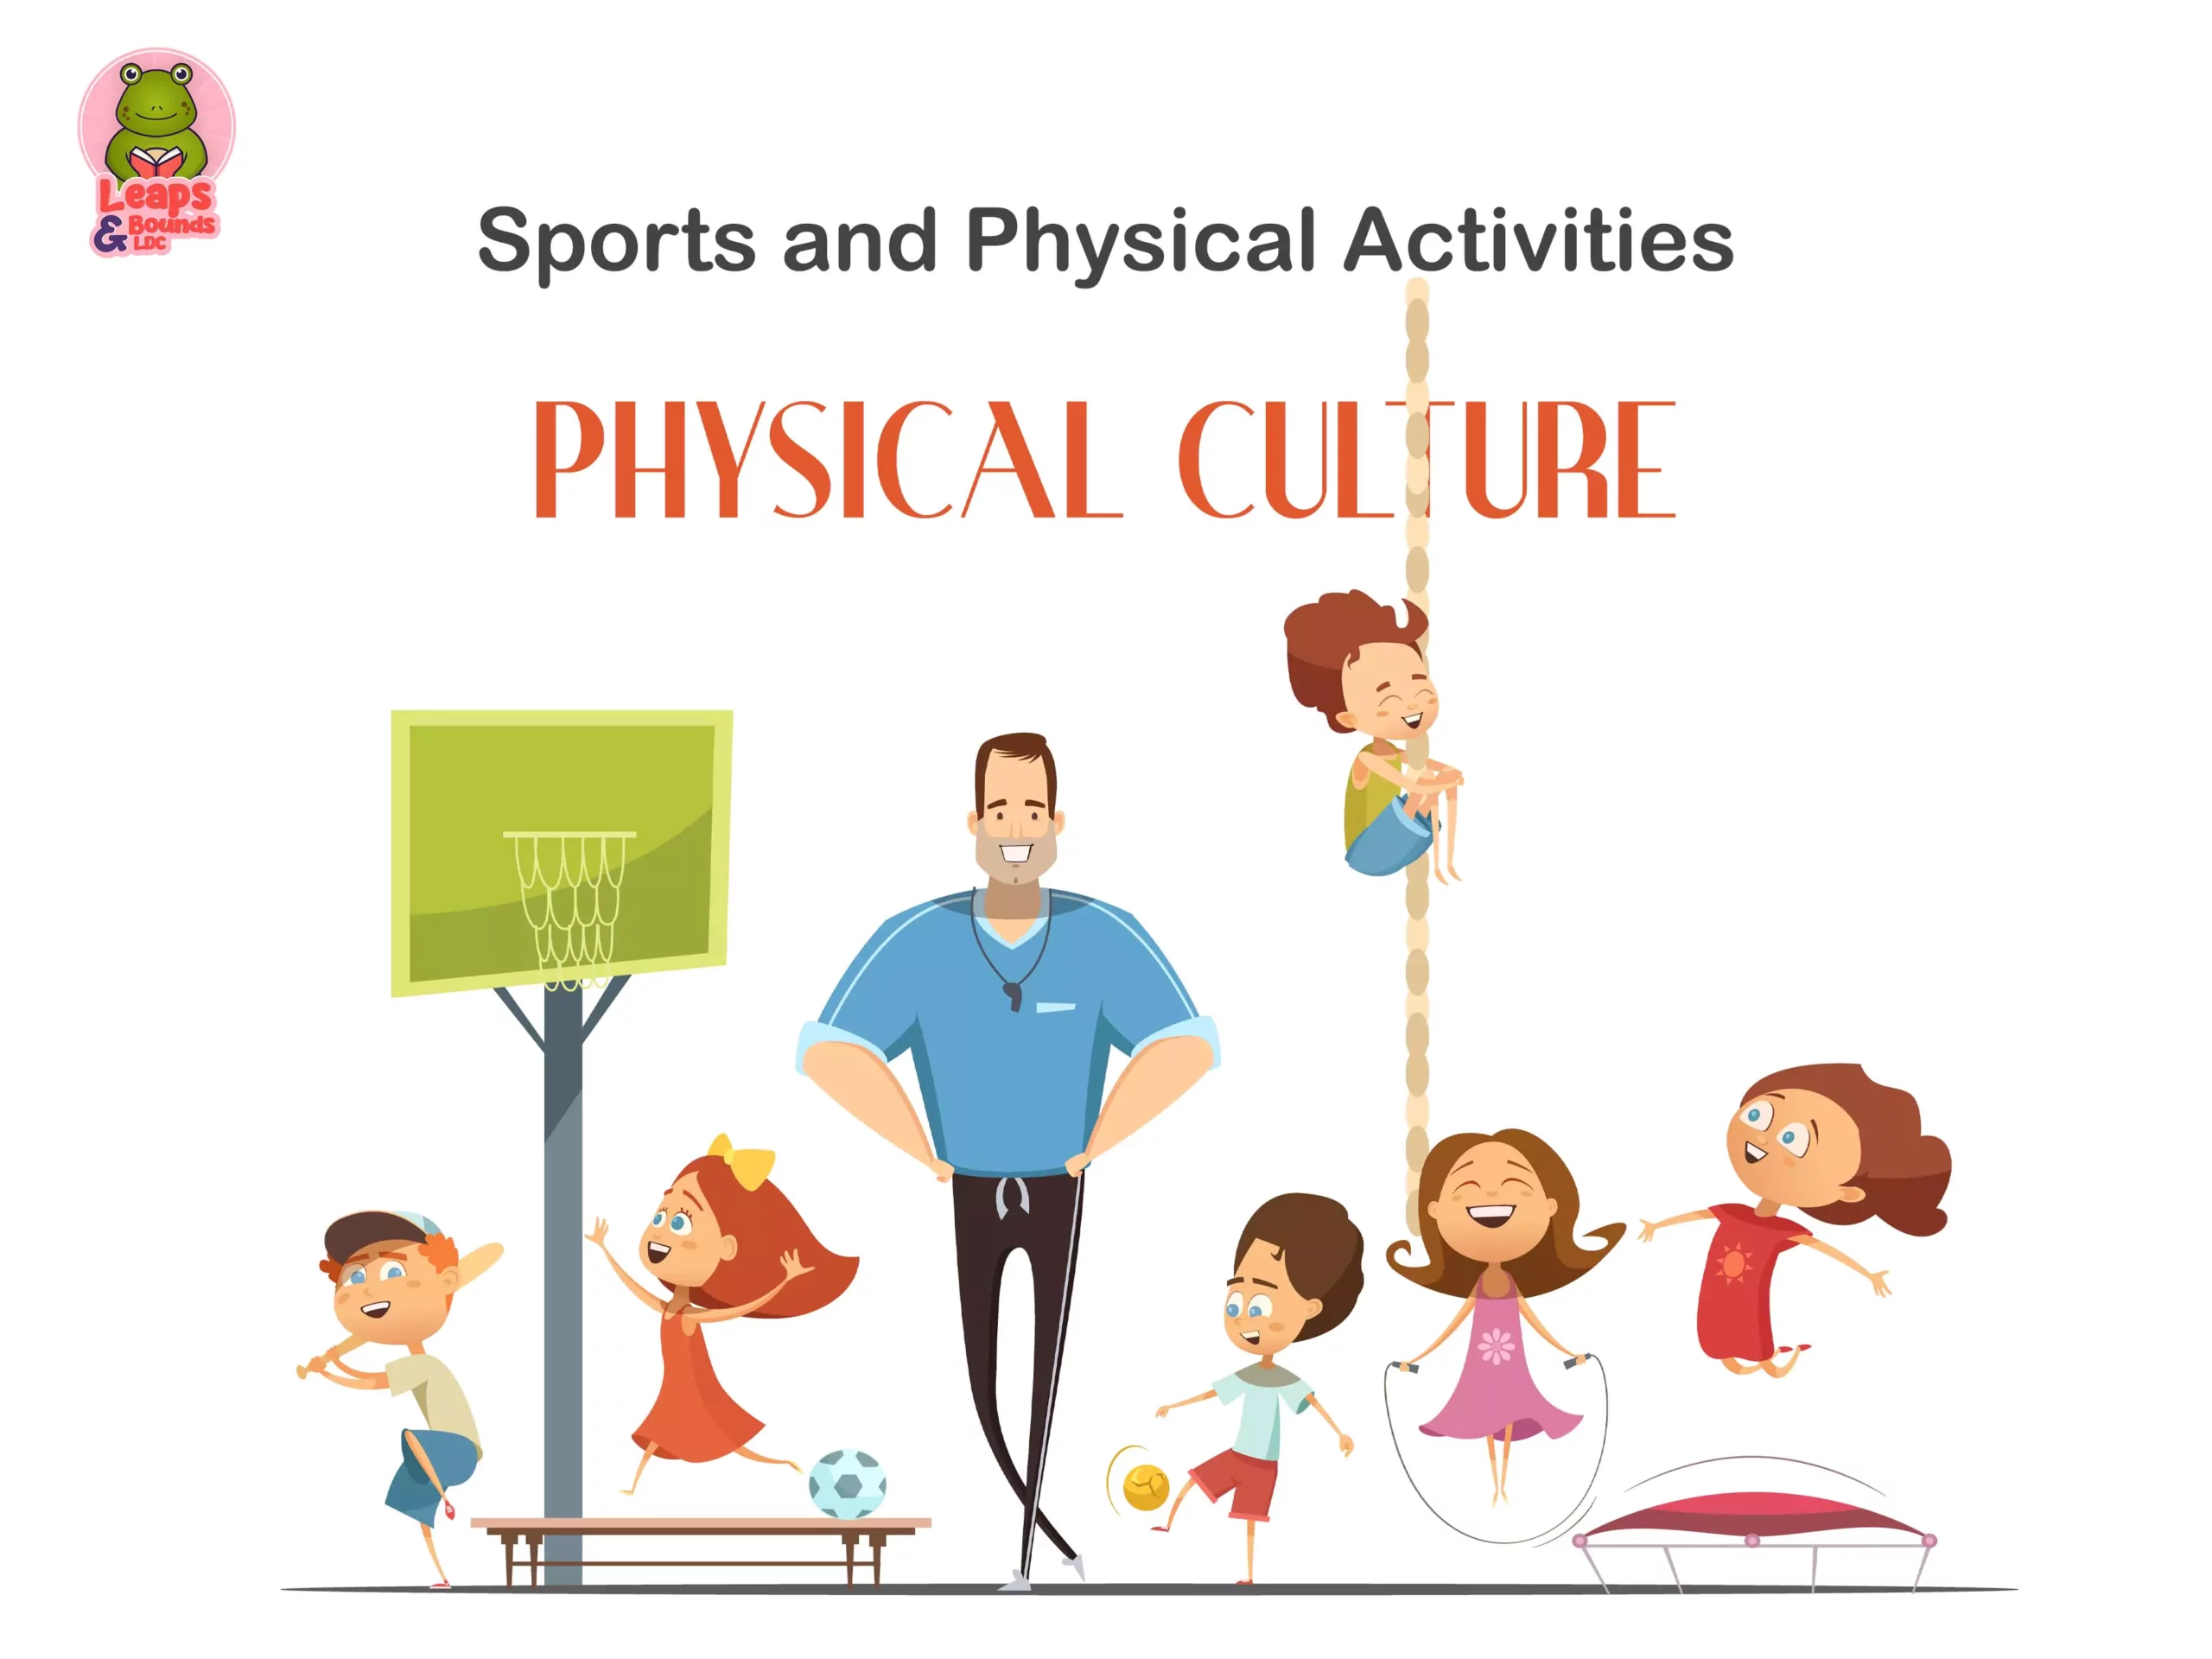 Sports and Physical Activities